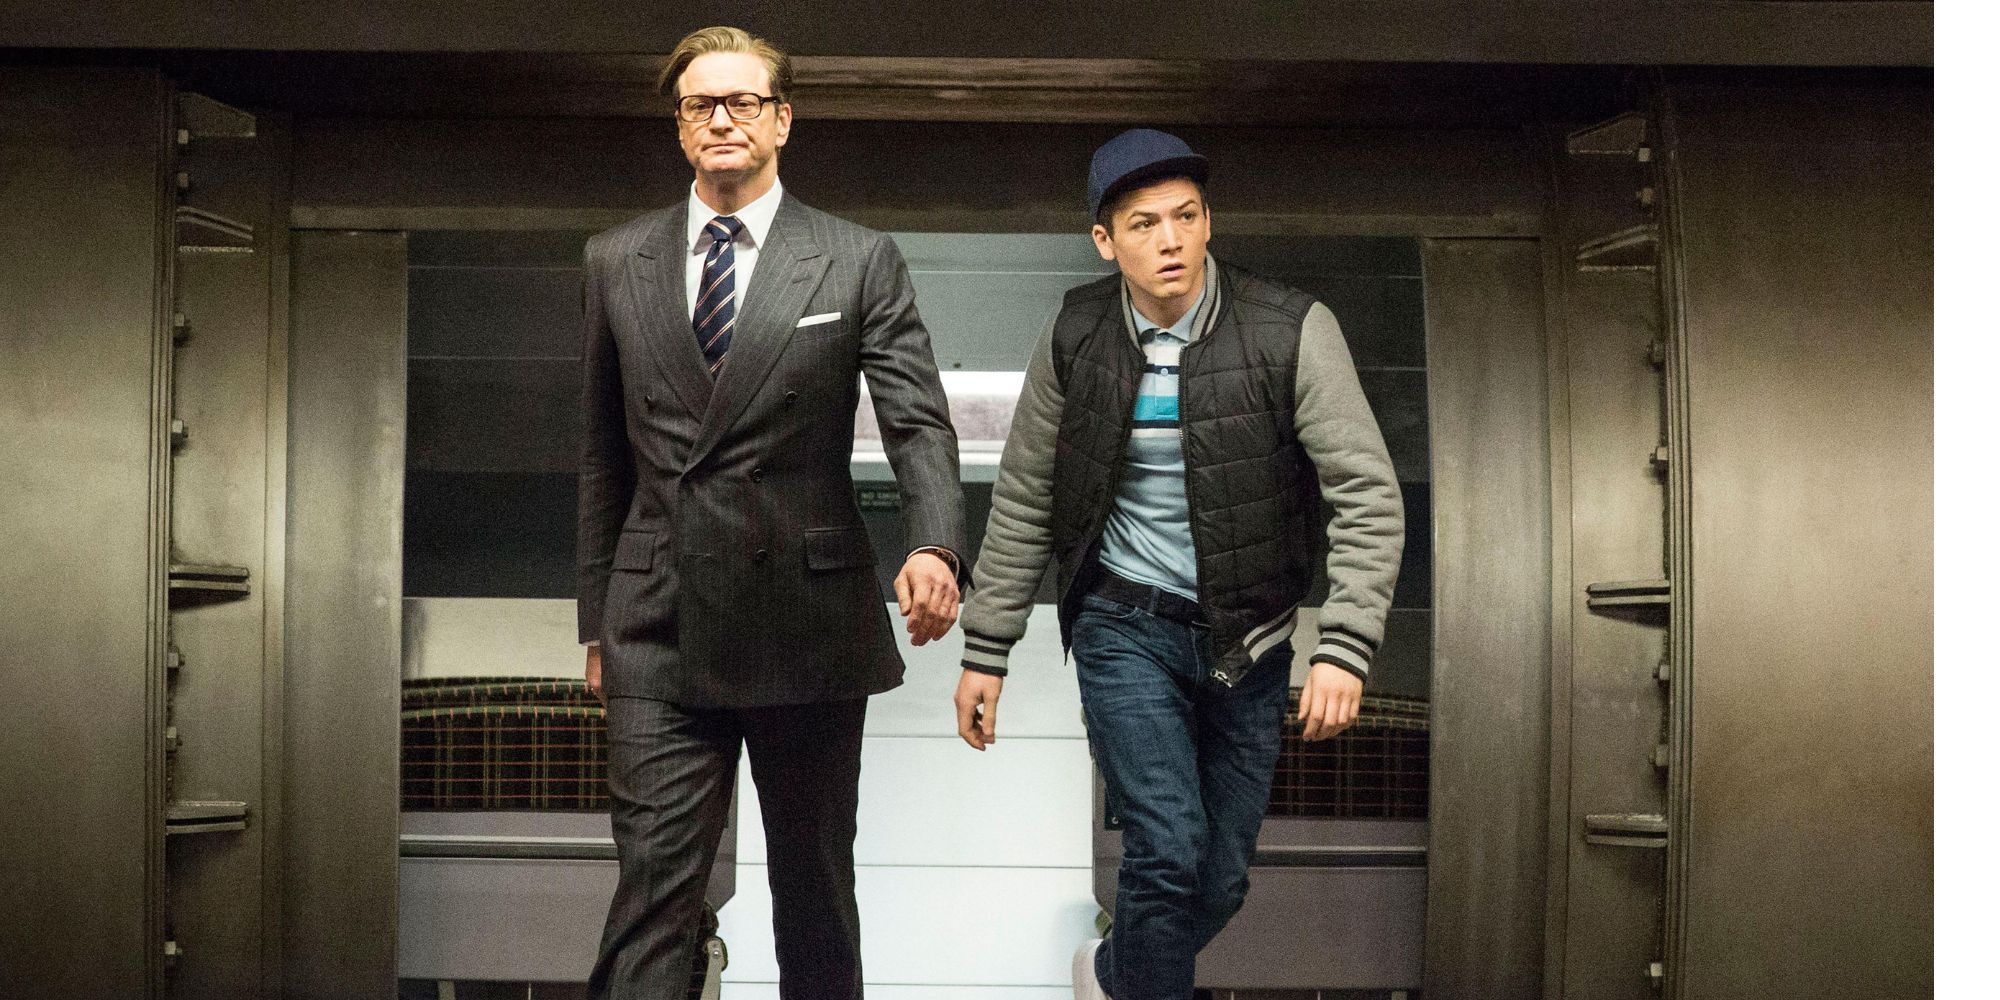 Eggsy and Galahad enter the Kingsman headquarters in Kingsman: The Secret Service